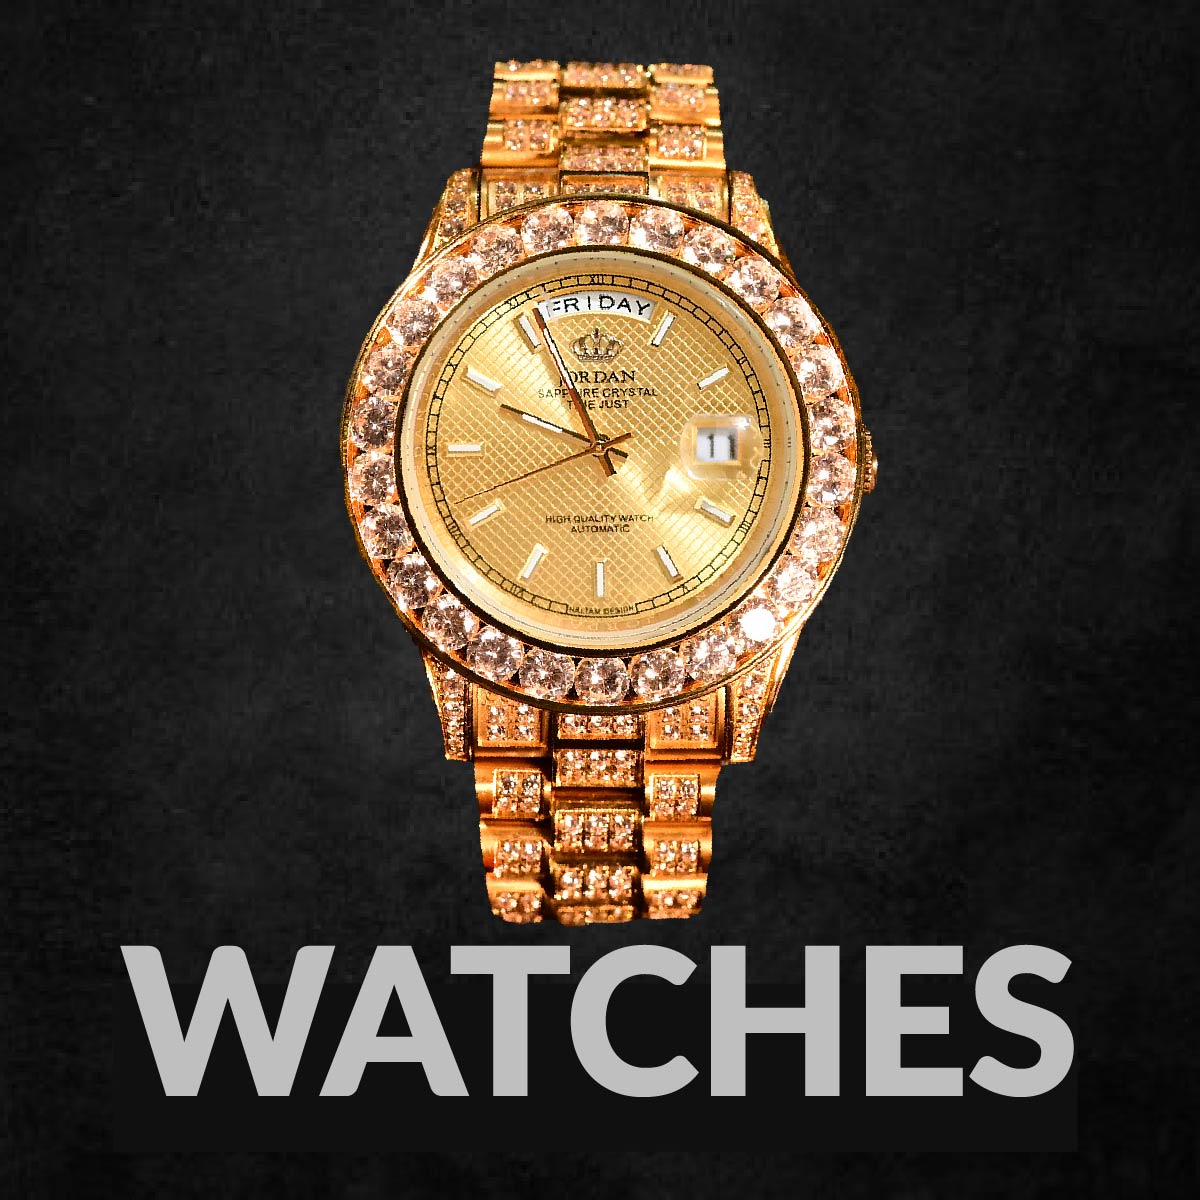 Watches - Free Shipping + Life Time Guarantee